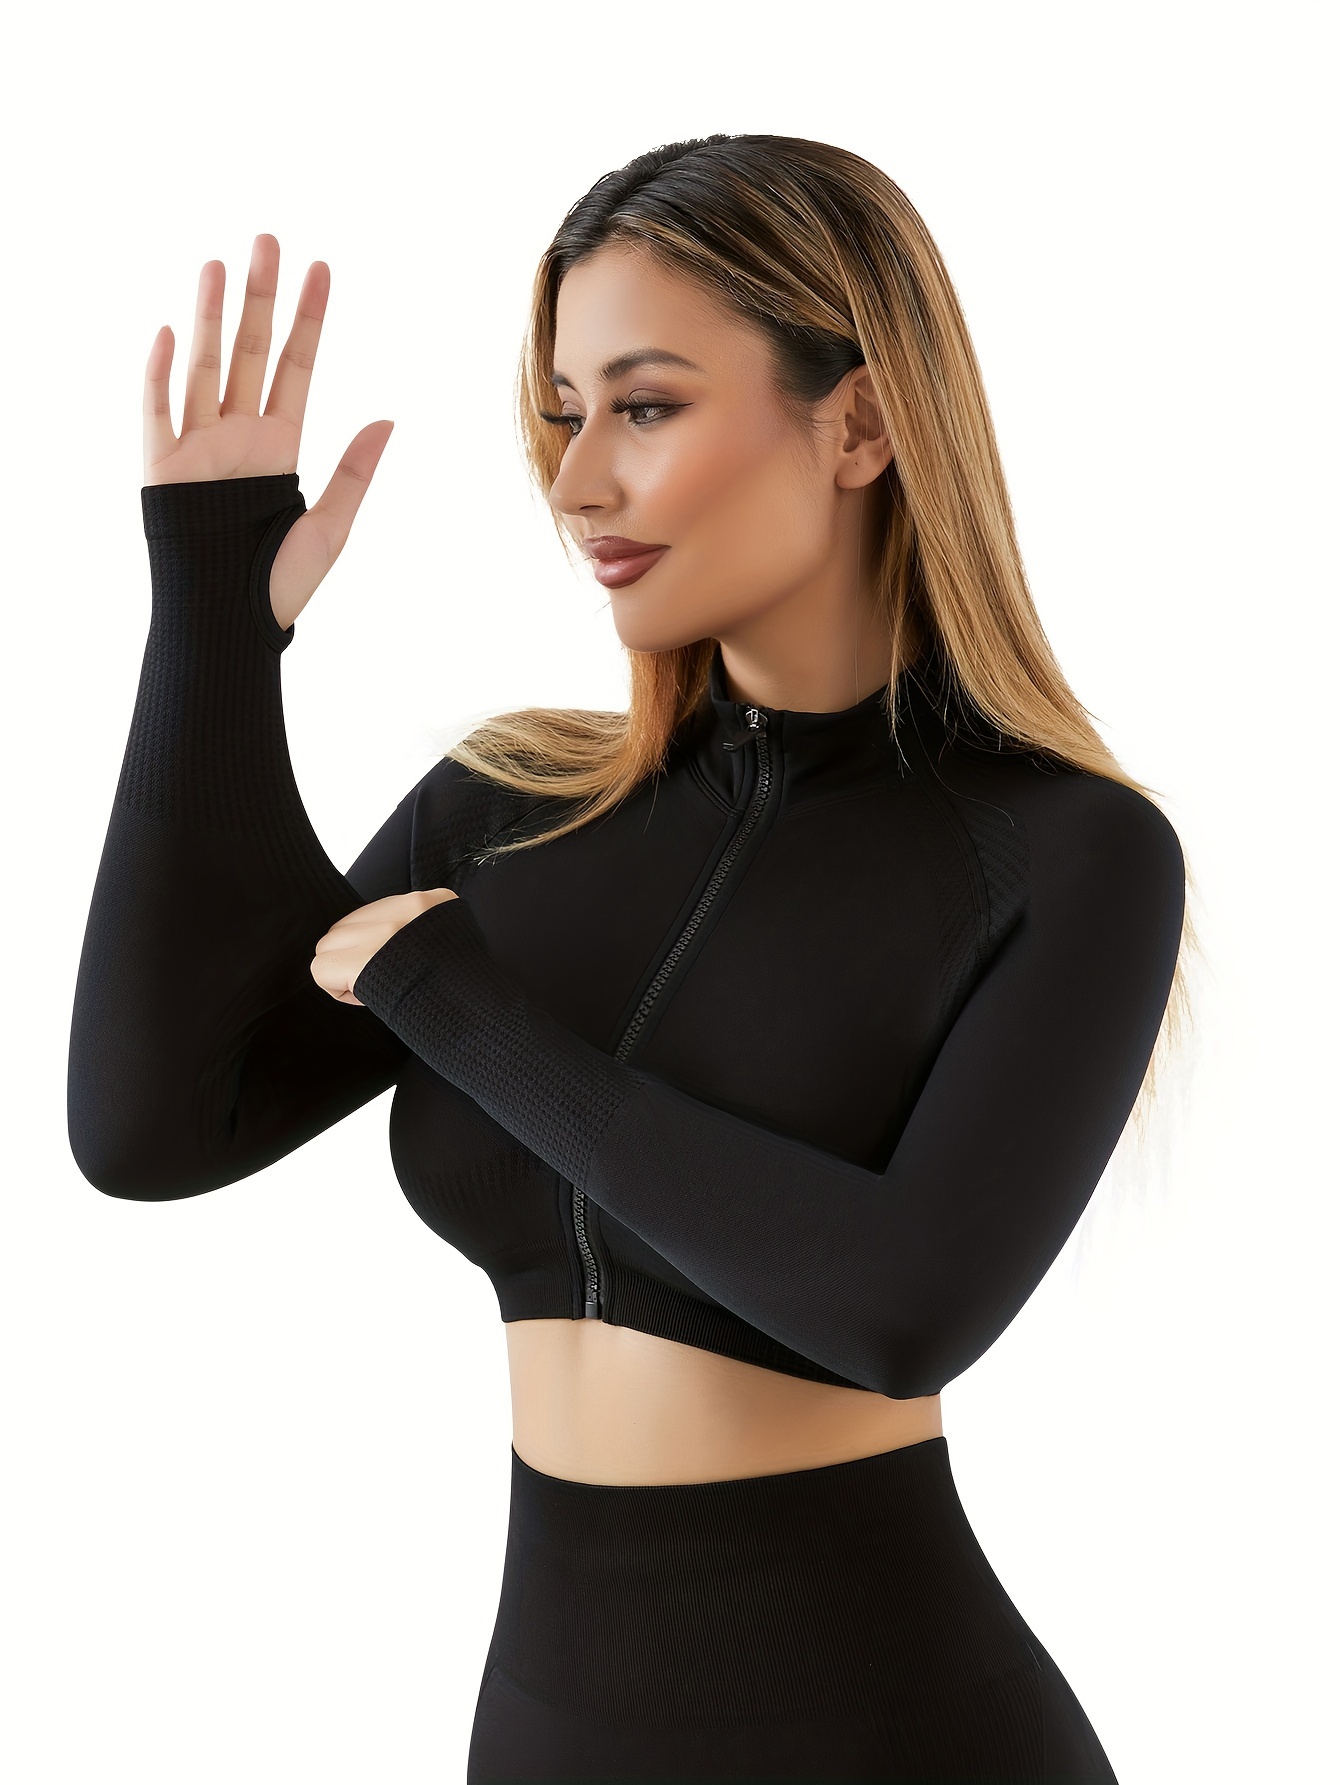 Women's Long Sleeve Sports Zipper Crop Top With Thumb Hole, Solid Color  Workout Running Fitness Yoga Shirts, Women's Activewear